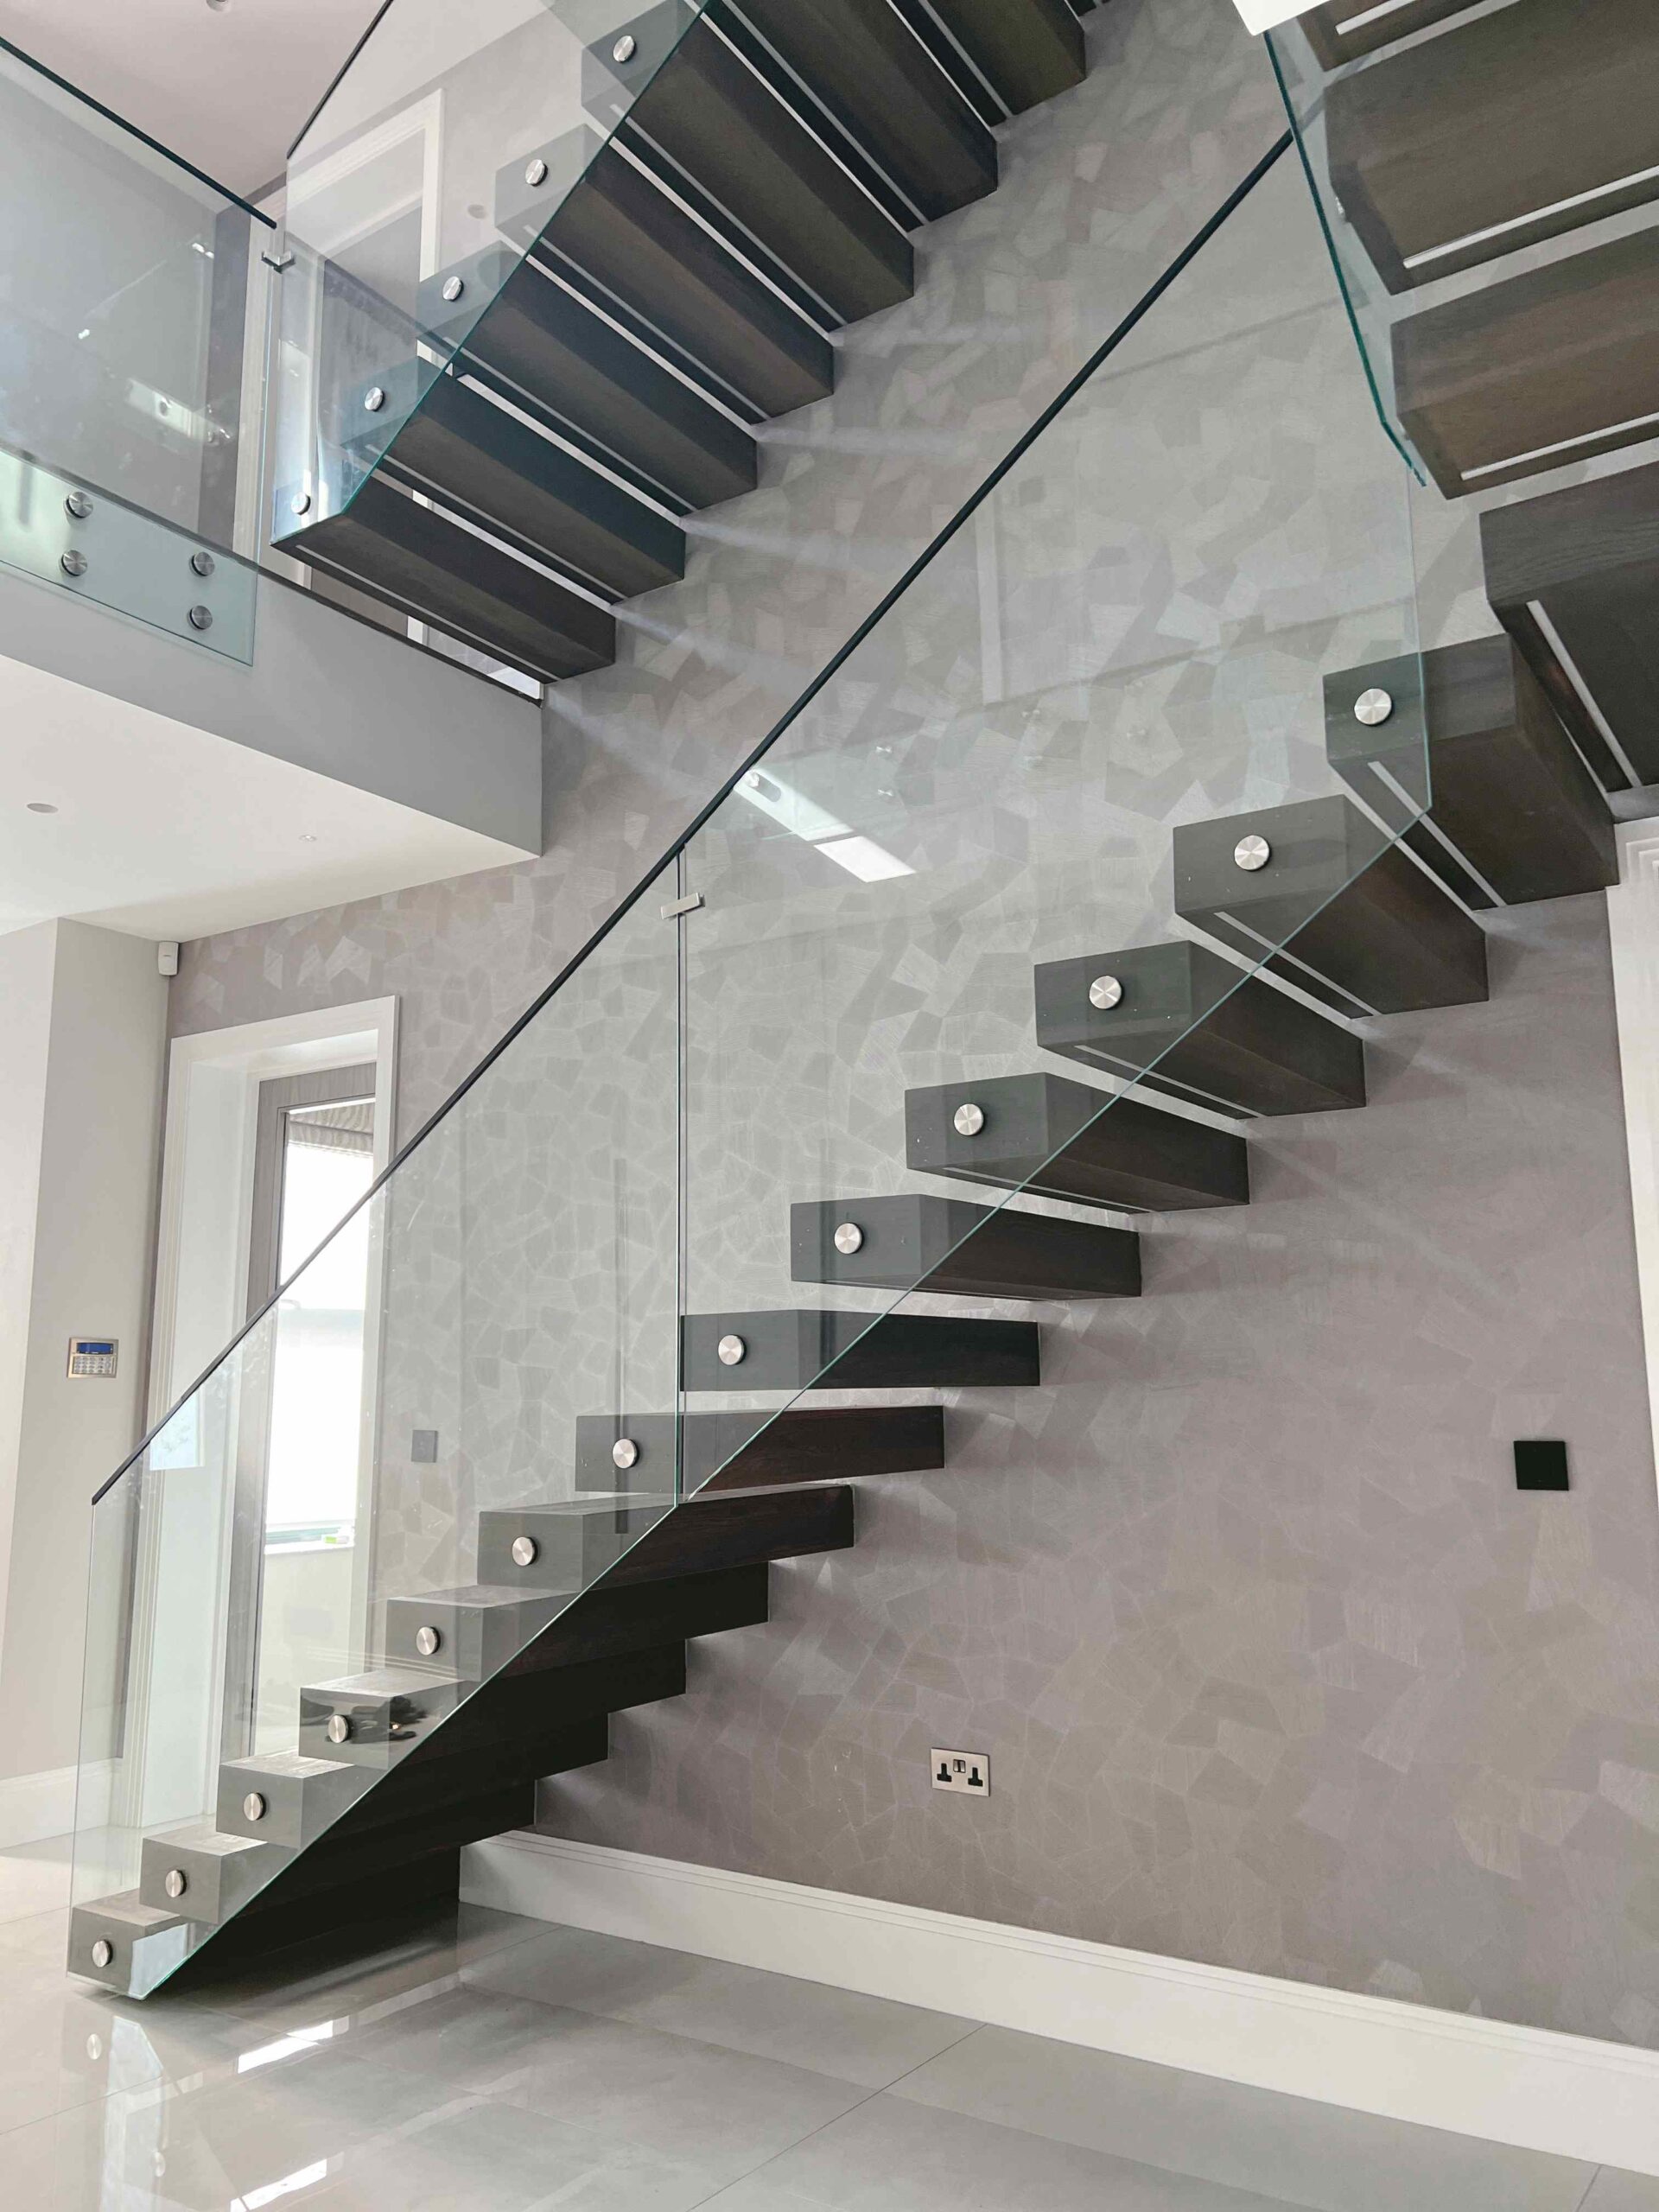 side view of a Floating staircase with glass balustrade